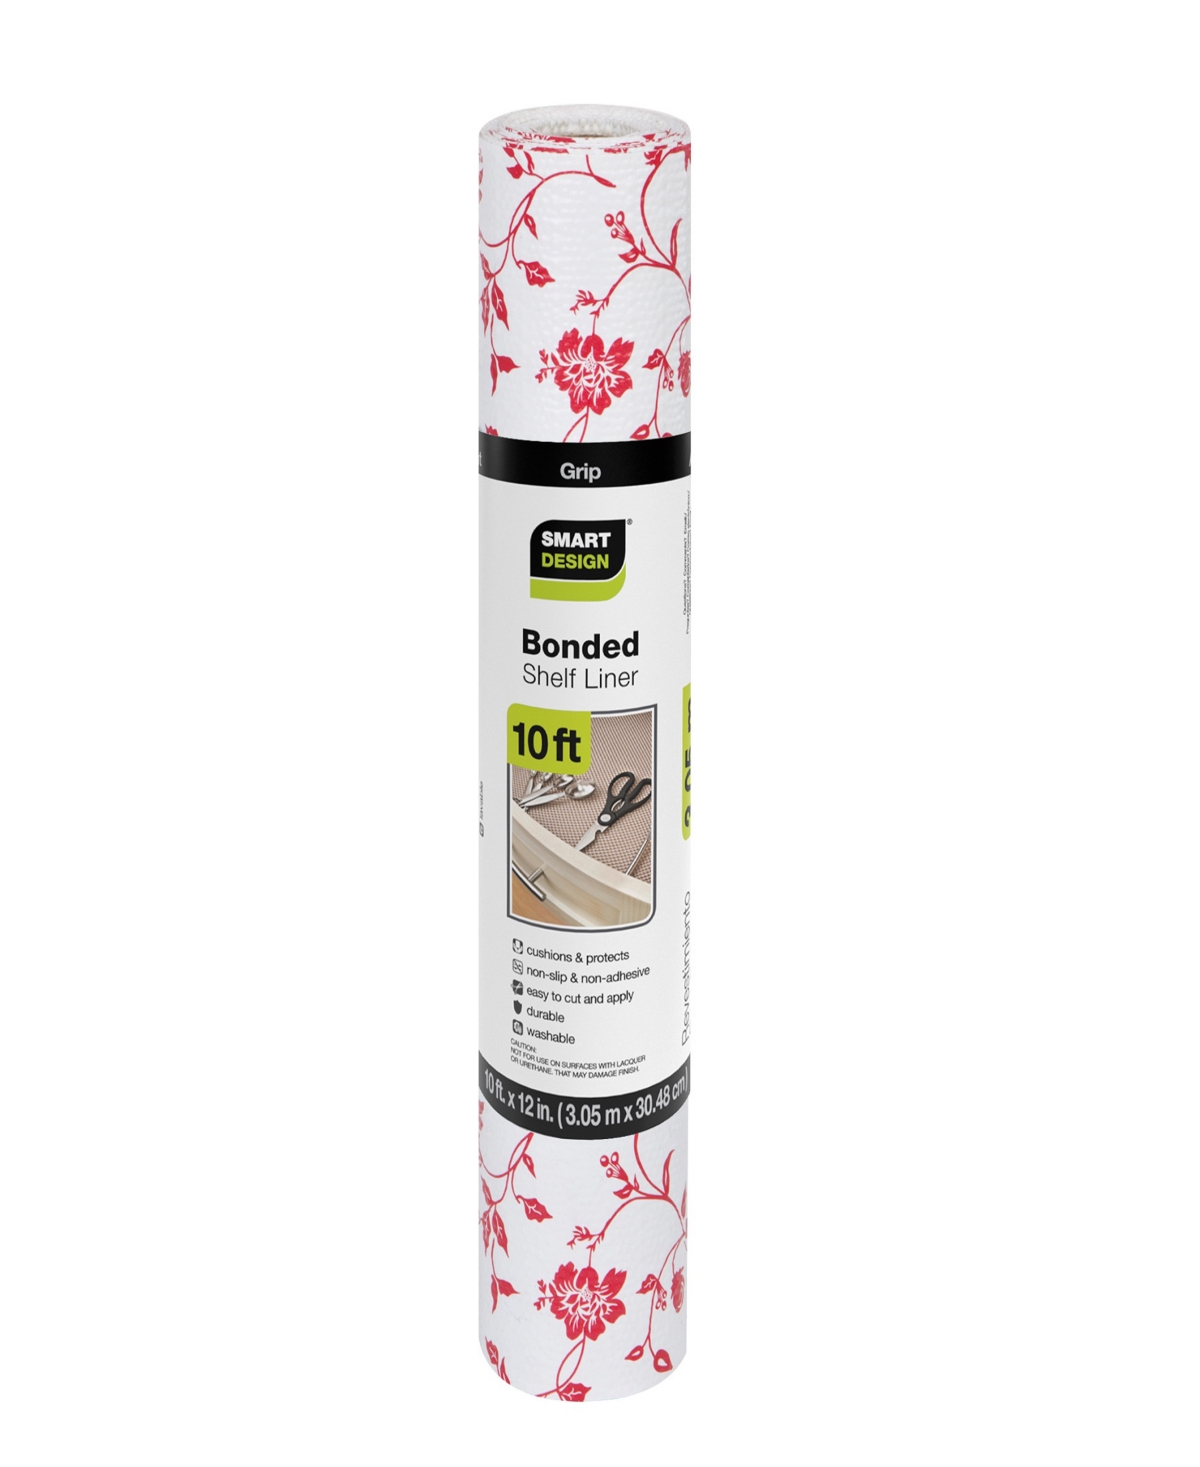 Bonded Grip Shelf Liner, 12" x 10' Roll - Wisteria Red